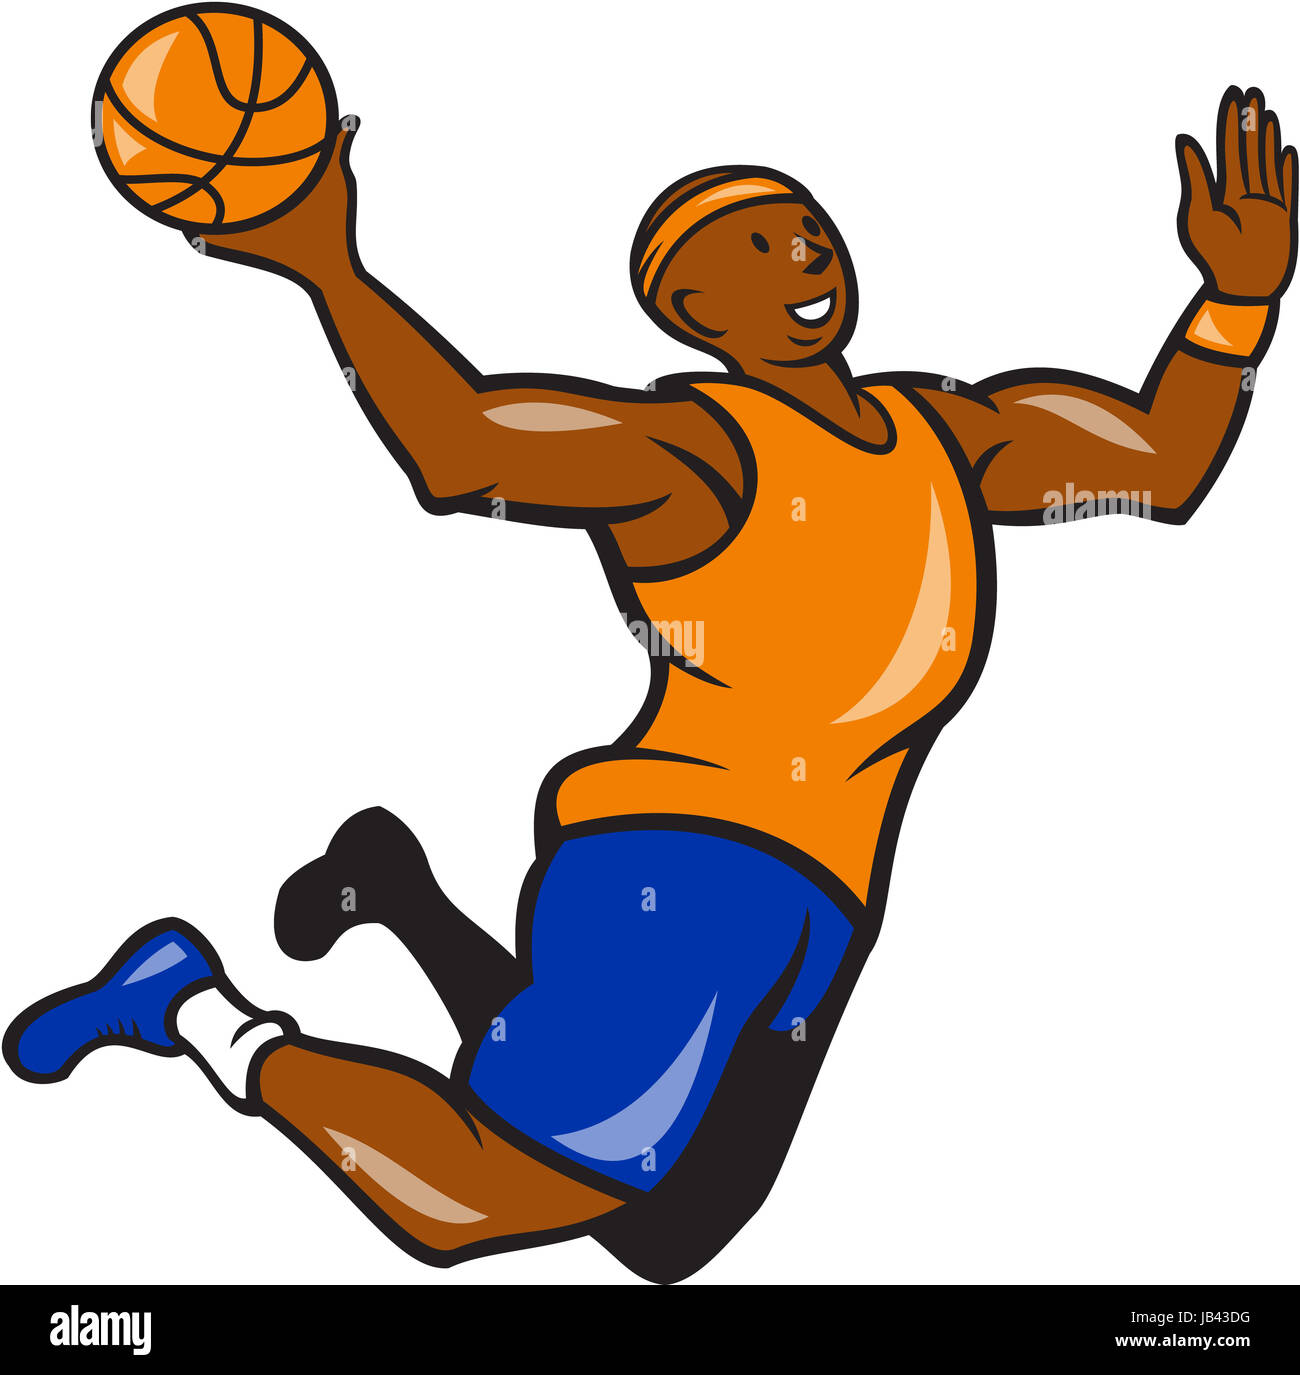 Illustration of a basketball player dunking rebounding lay up ball set isolated white background done in cartoon style. Stock Photo